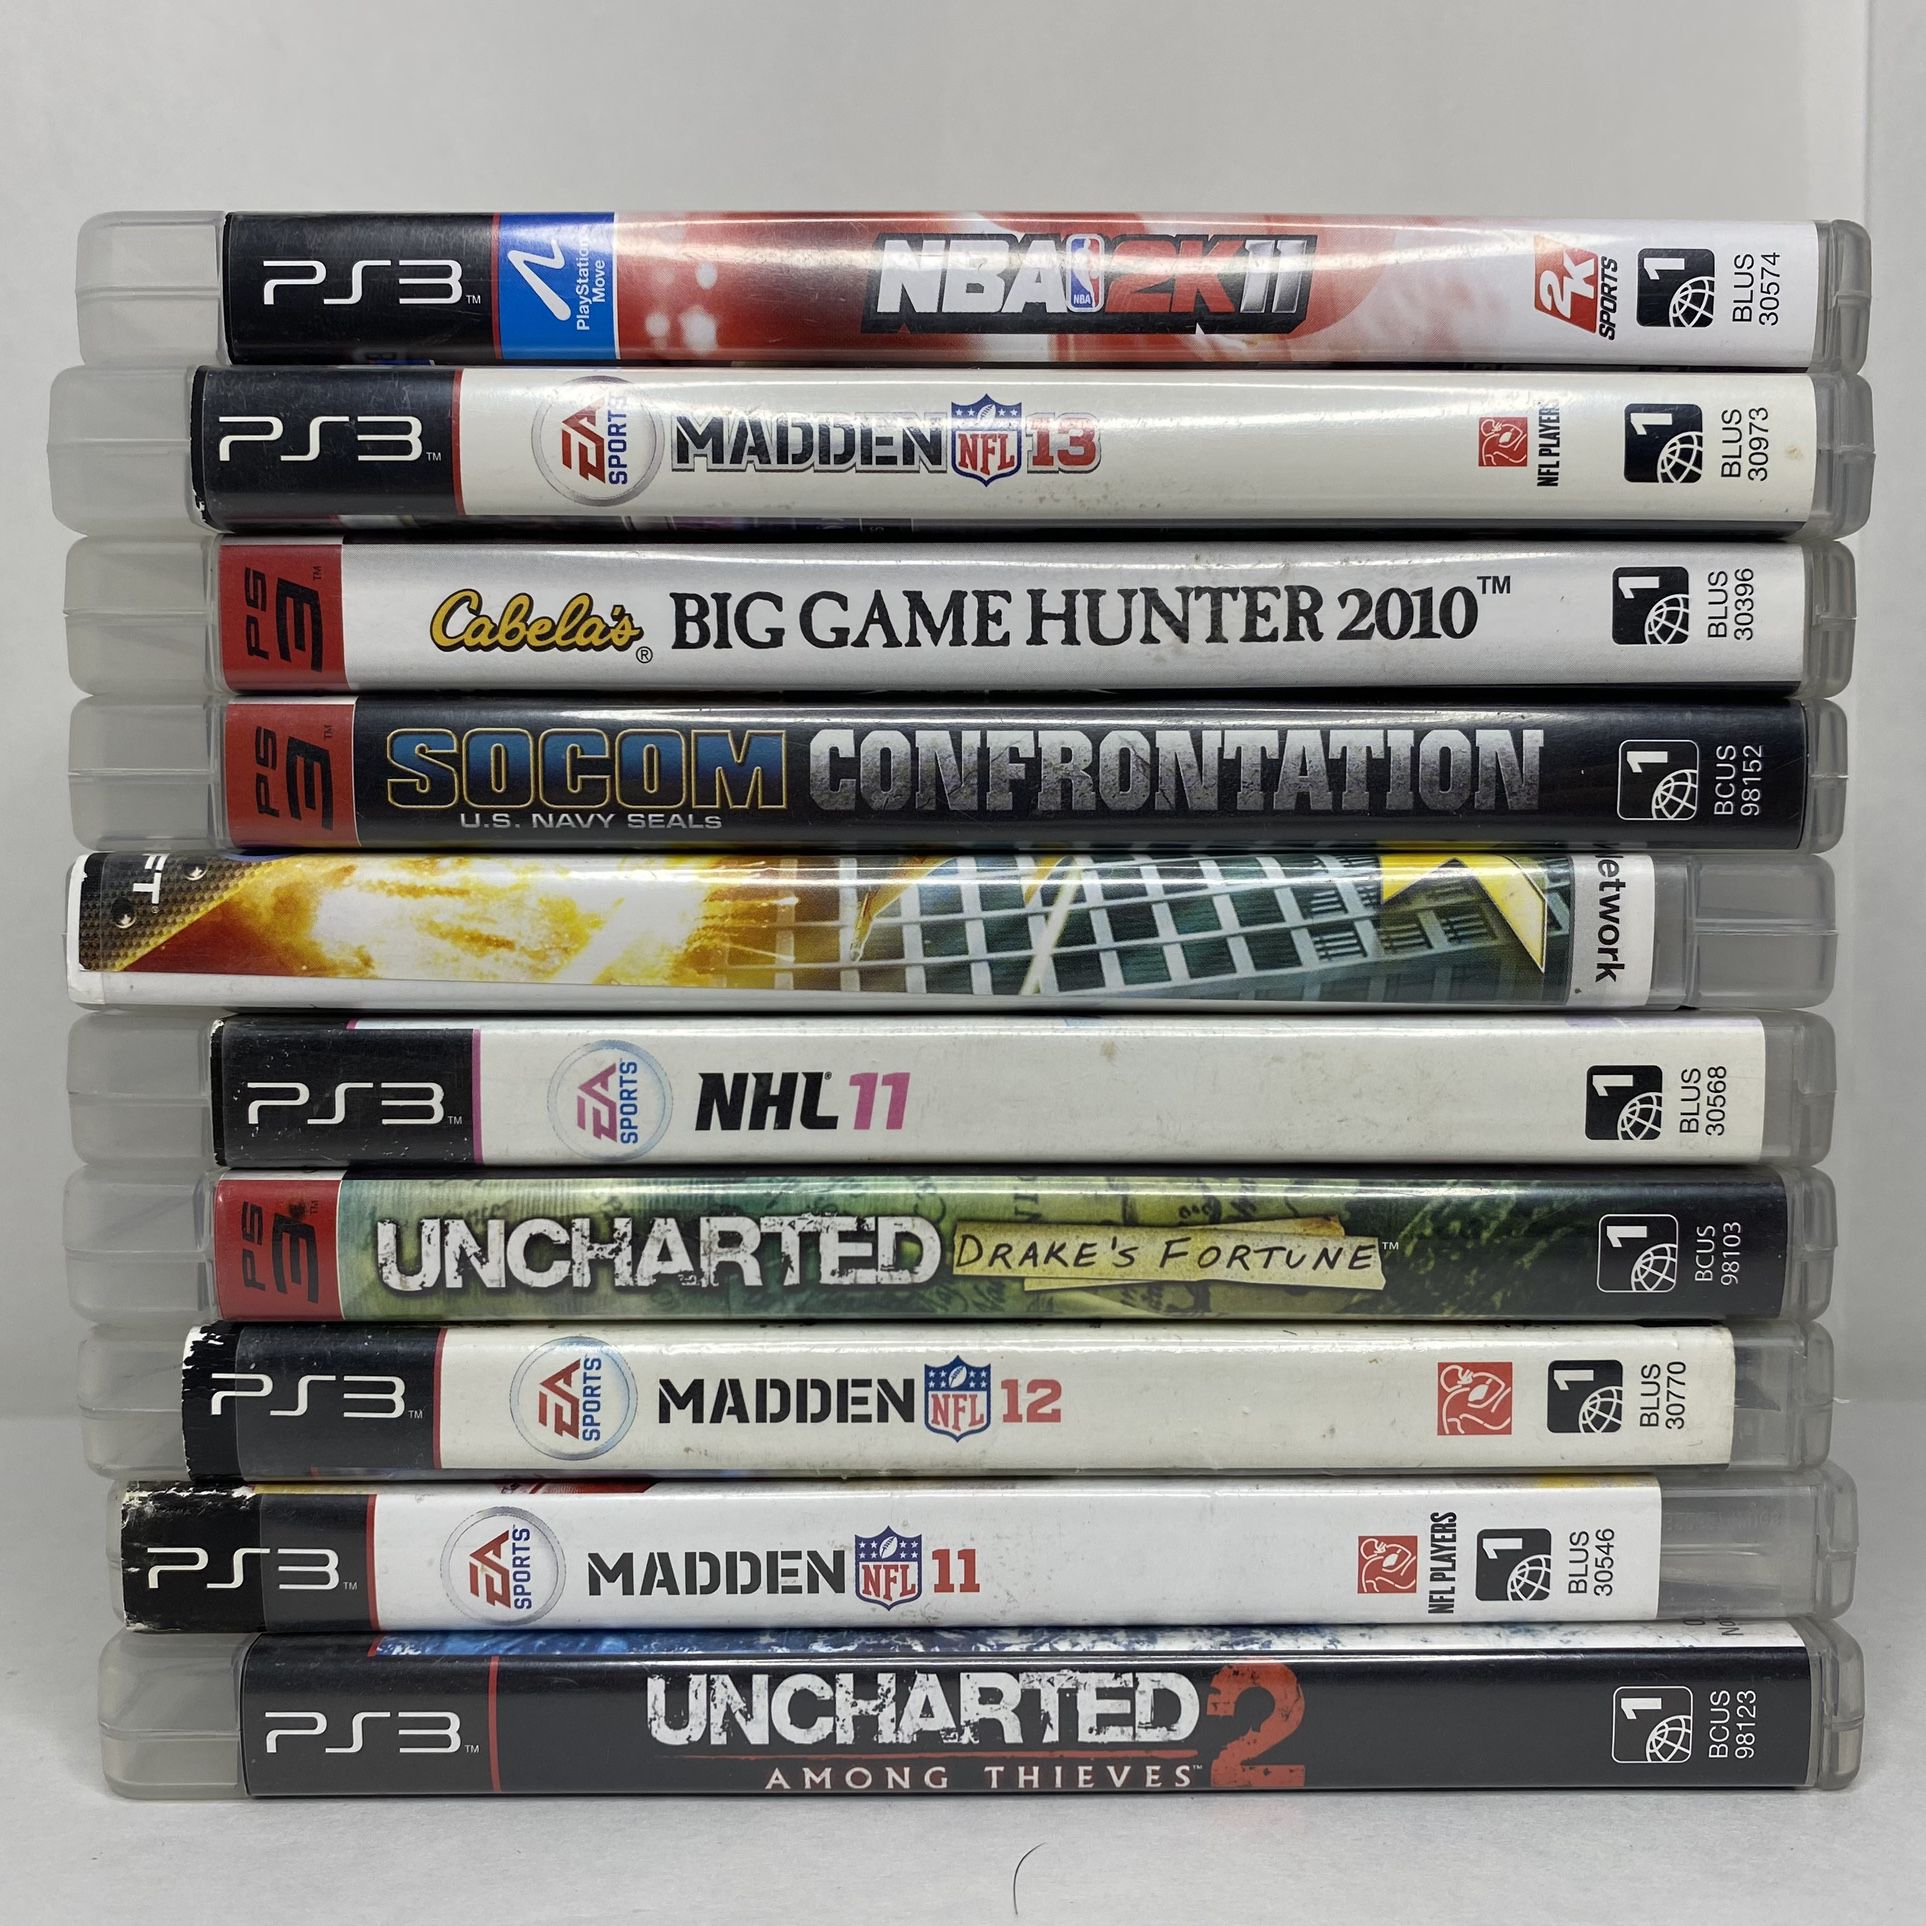 Sony PlayStation 3 Video Game Lot Of 10 PS3